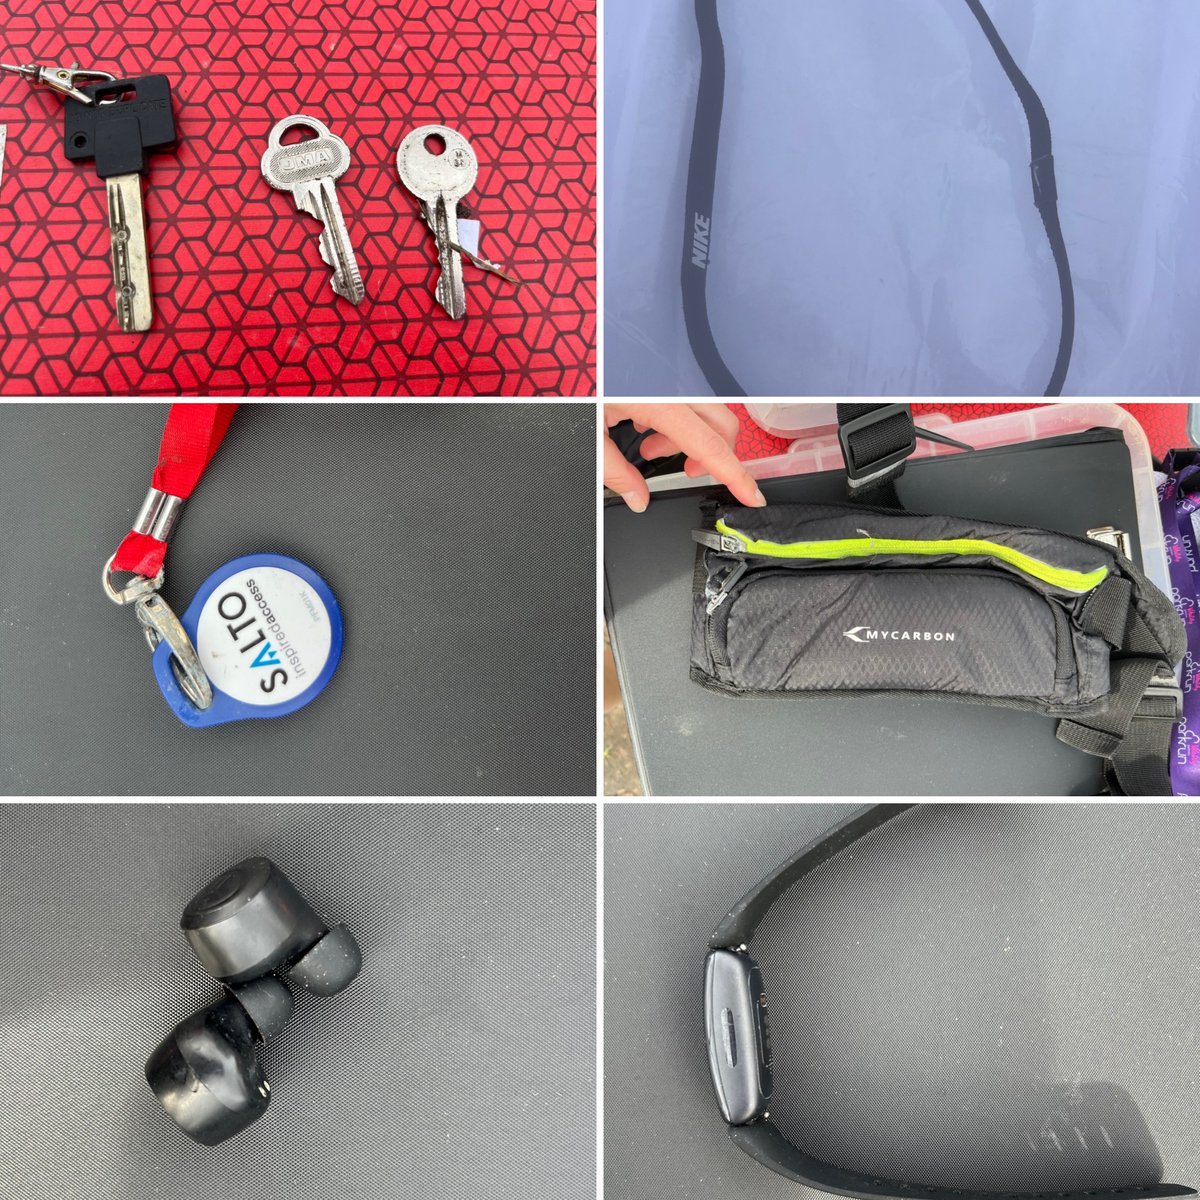 Lost and found alert! Do you recognise any of these items? Please get in touch to claim them back. (Please note that anything that will remain unclaimed by within a few weeks is going to charity!)